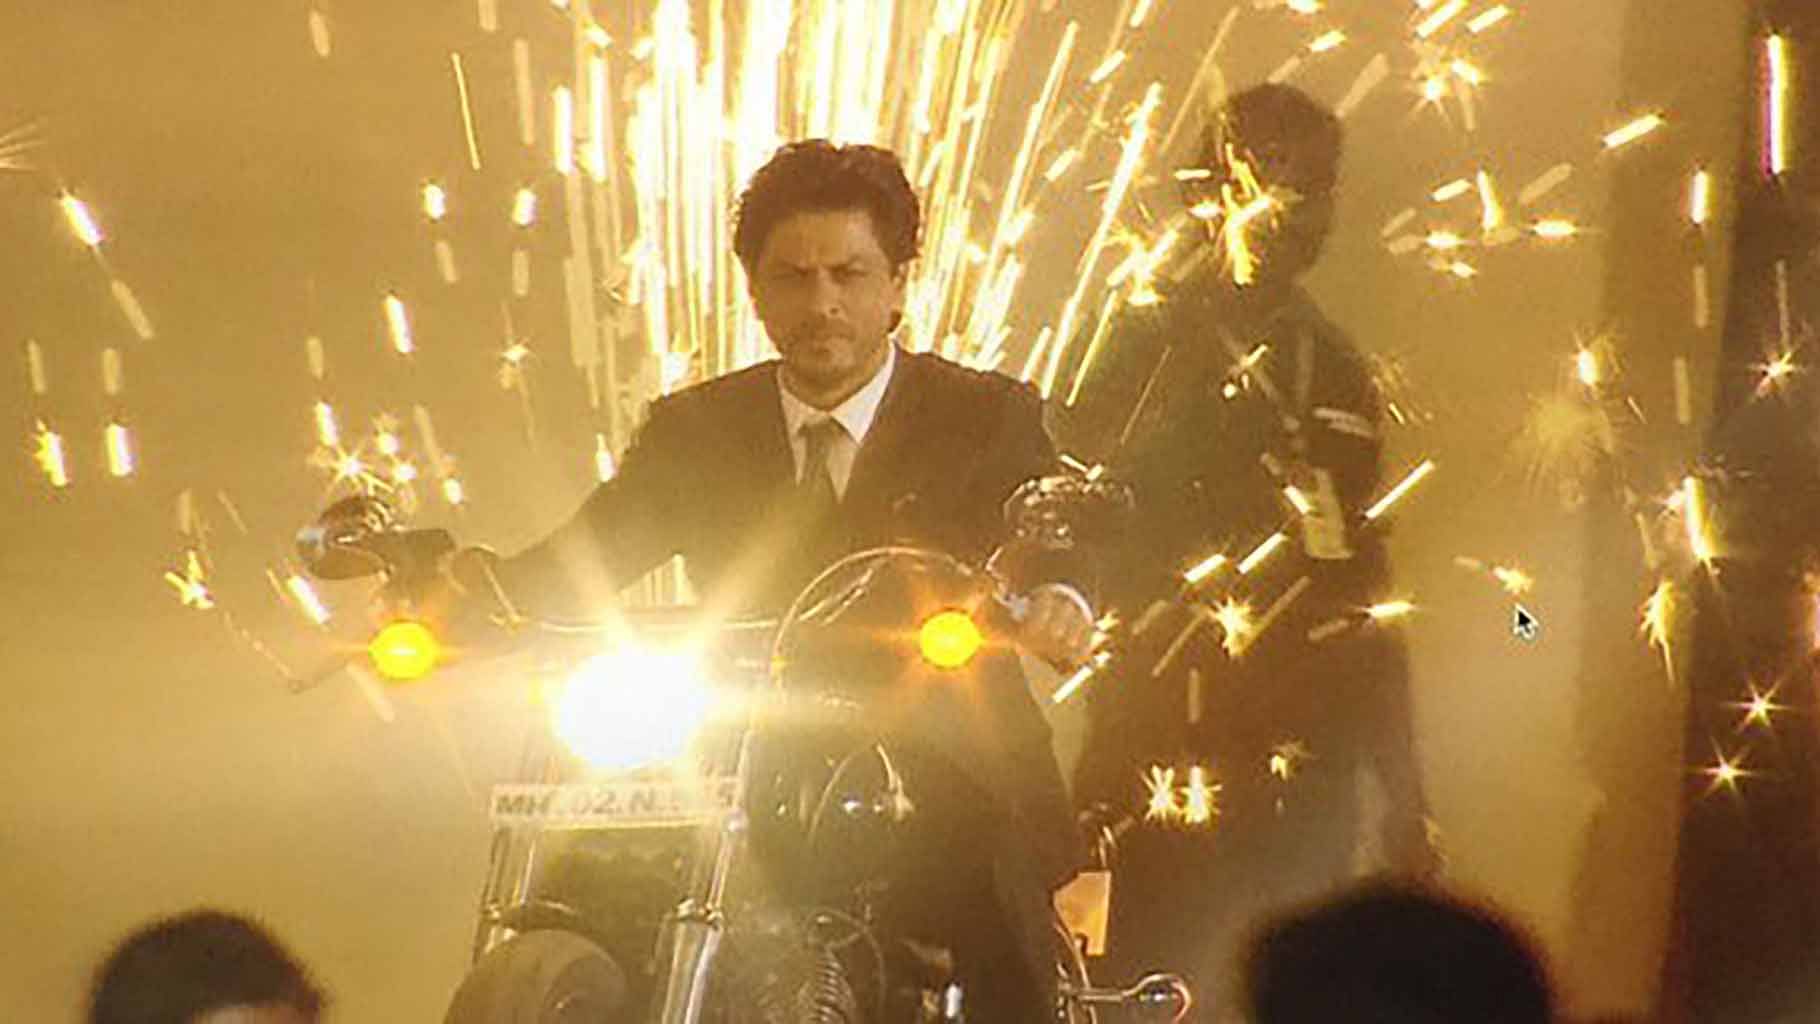 SRK’s smart entry to the event. (Photo: <a href="https://twitter.com/SRKFC1/status/681113866496008196">Twitter</a>)